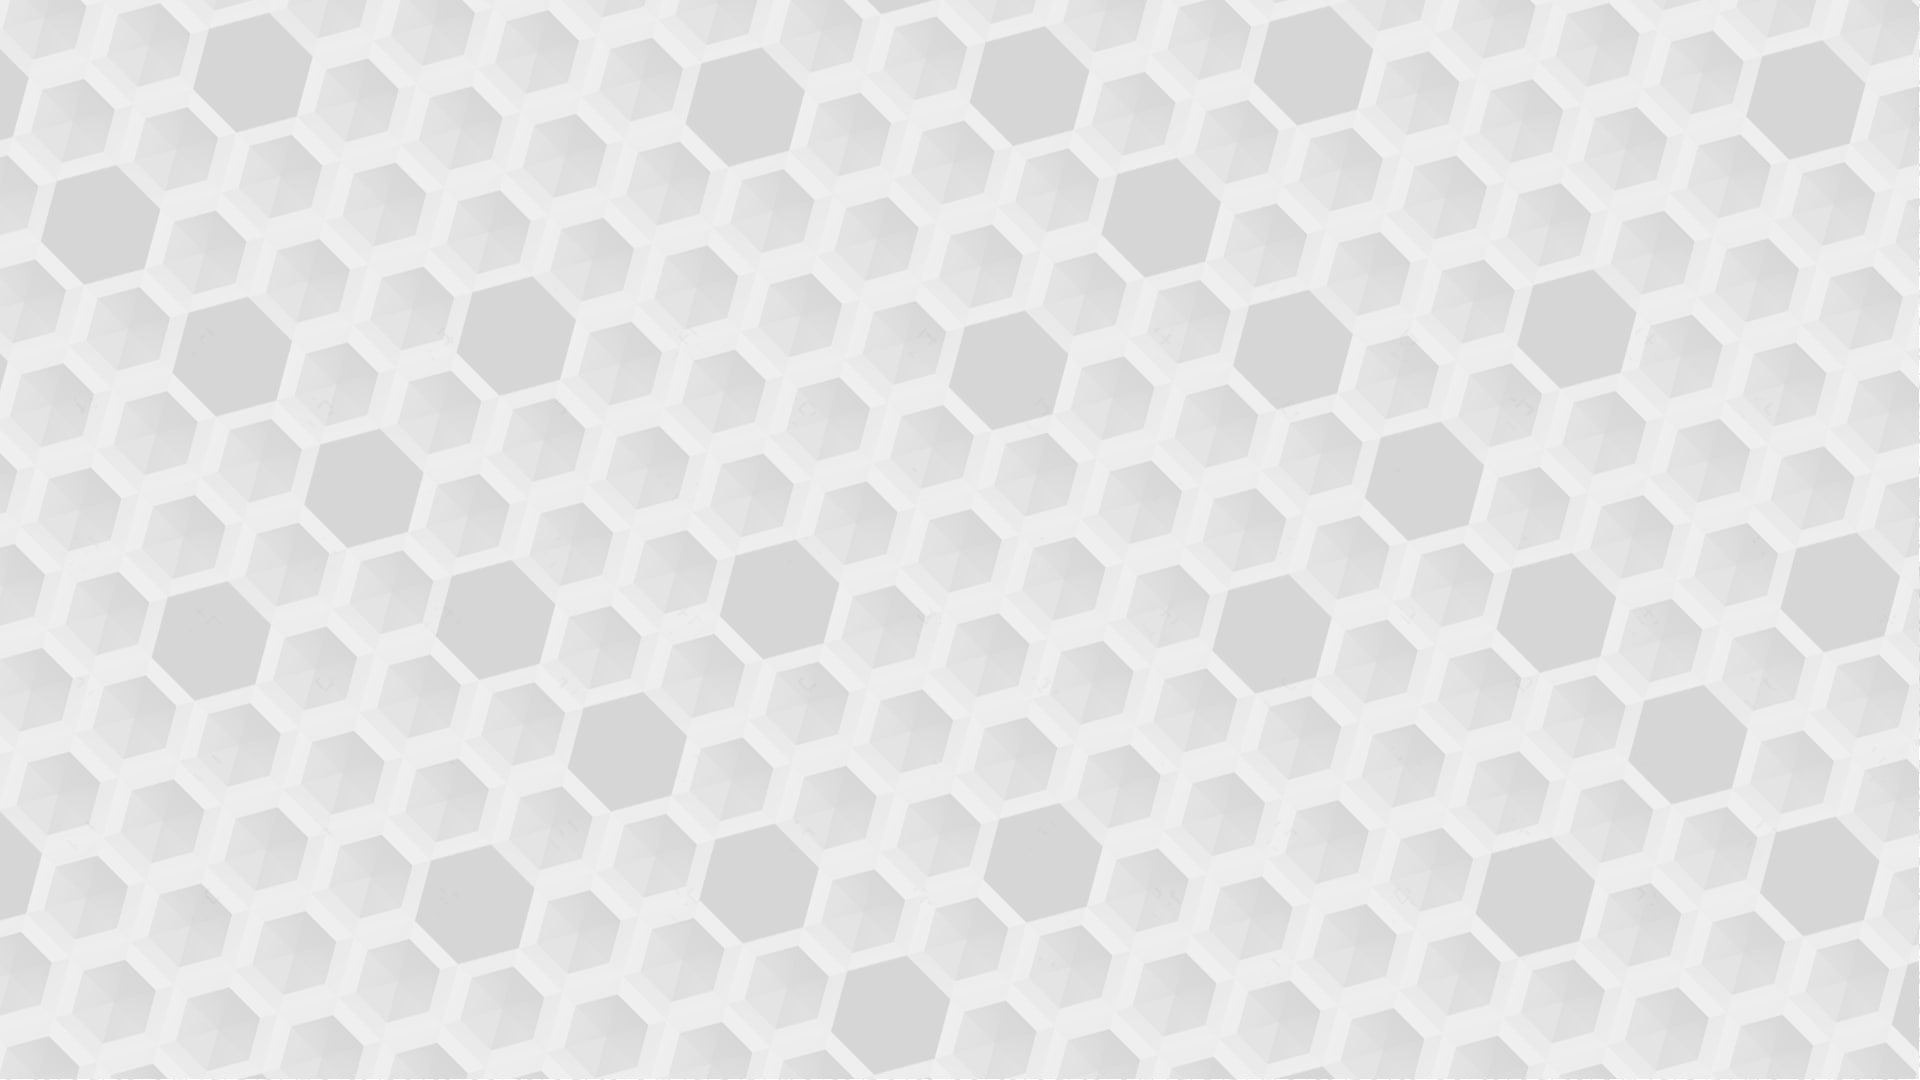 hive, honeycombs, hexagon, bright, white, simple, abstract